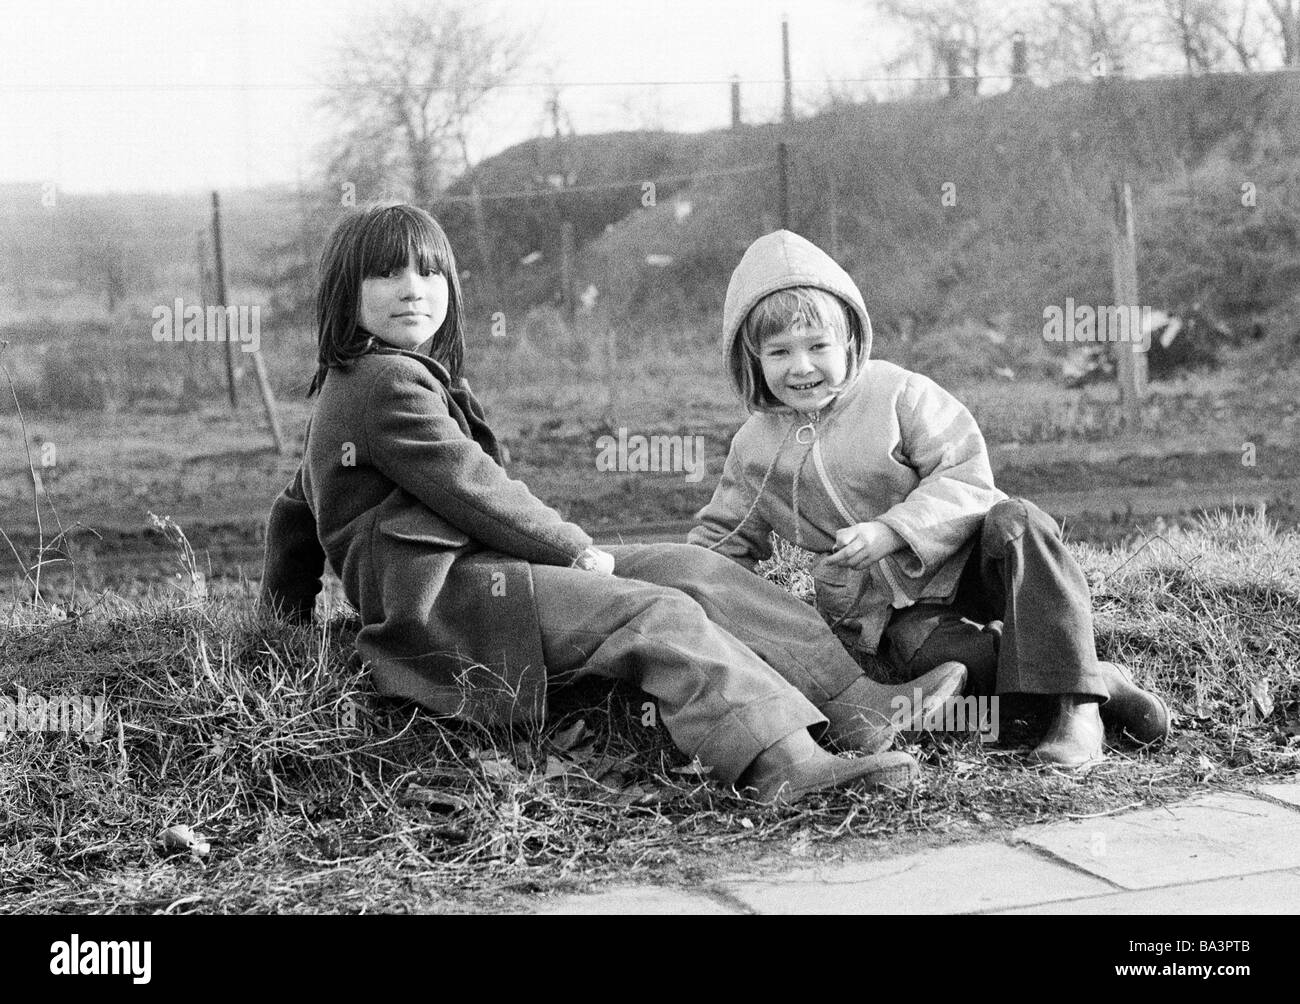 Seventies, black and white photo, people, children, two little girls sit in the grass, aged 5 to 10 years Stock Photo